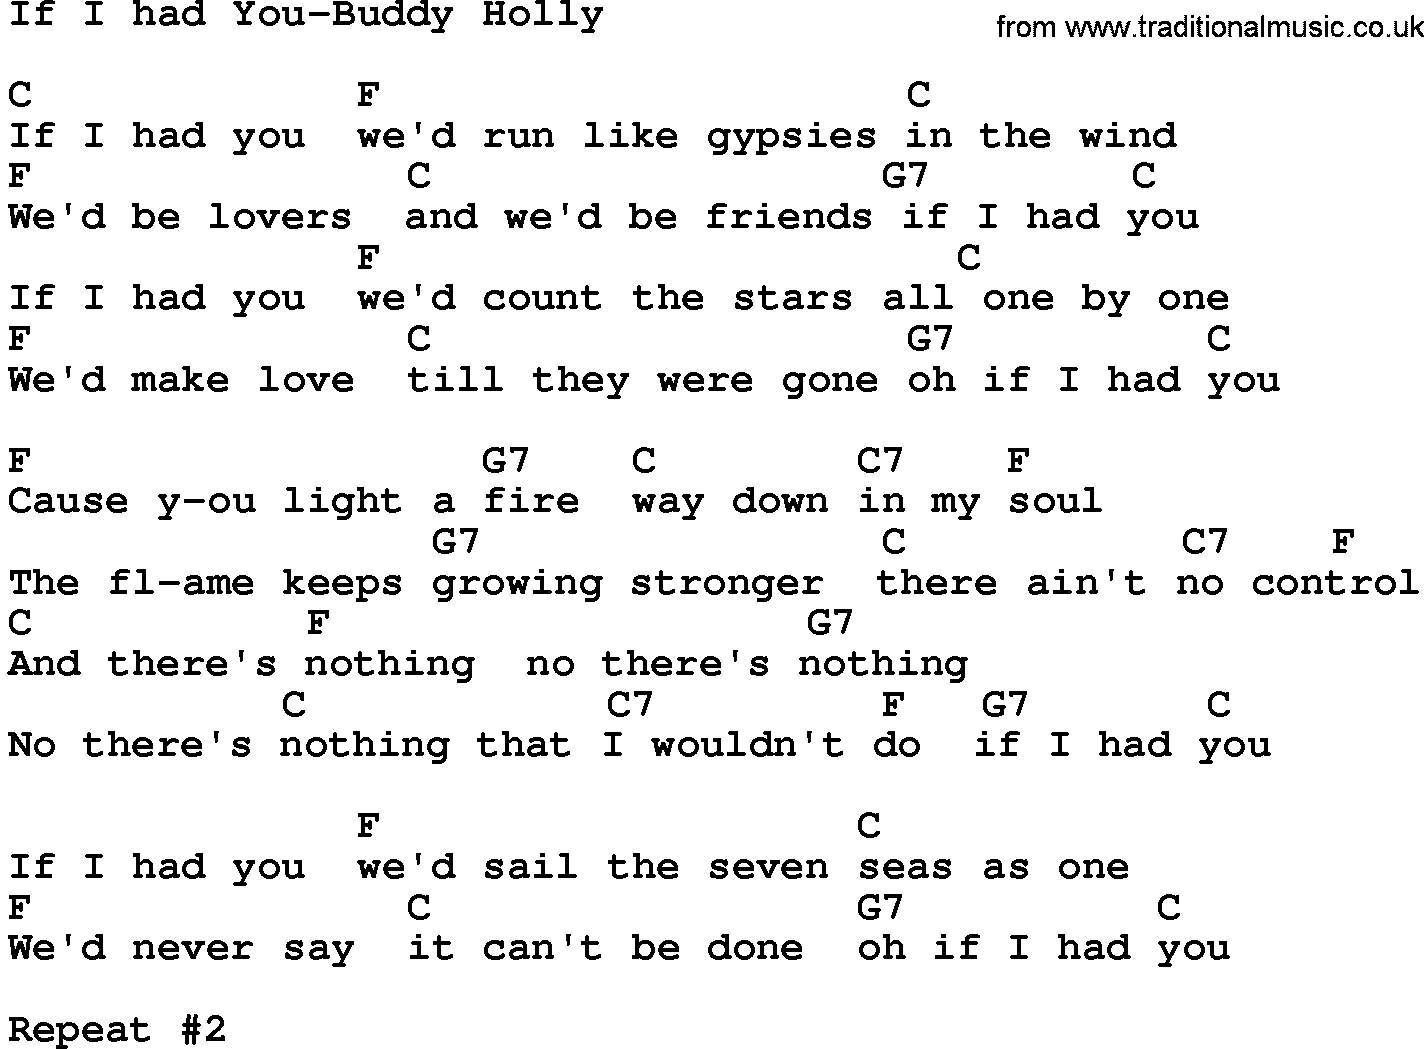 Country music song: If I Had You-Buddy Holly lyrics and chords